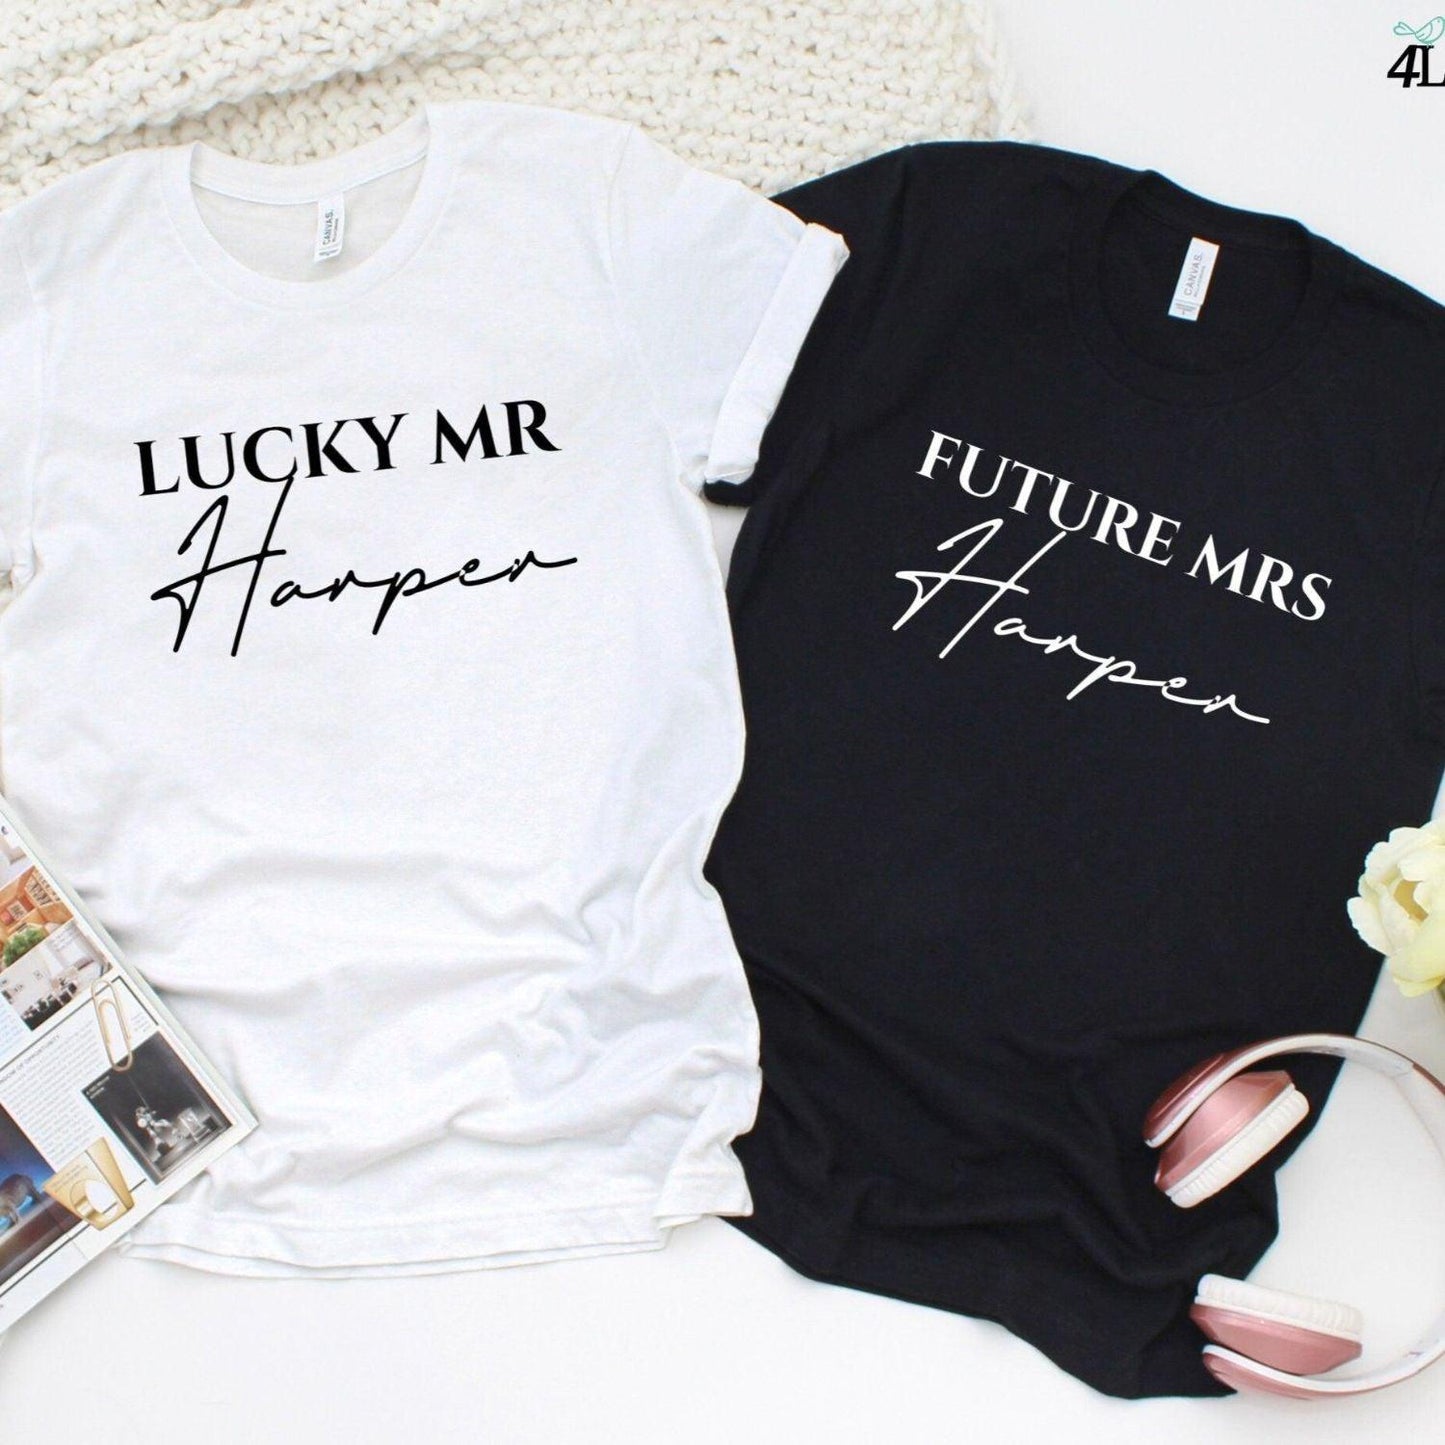 Custom Matching Outfits: Lucky Mr [Last Name] & Future Mrs [Last Name] - Ideal Couple's Engagement Present - Honeymoon Wear - 4Lovebirds